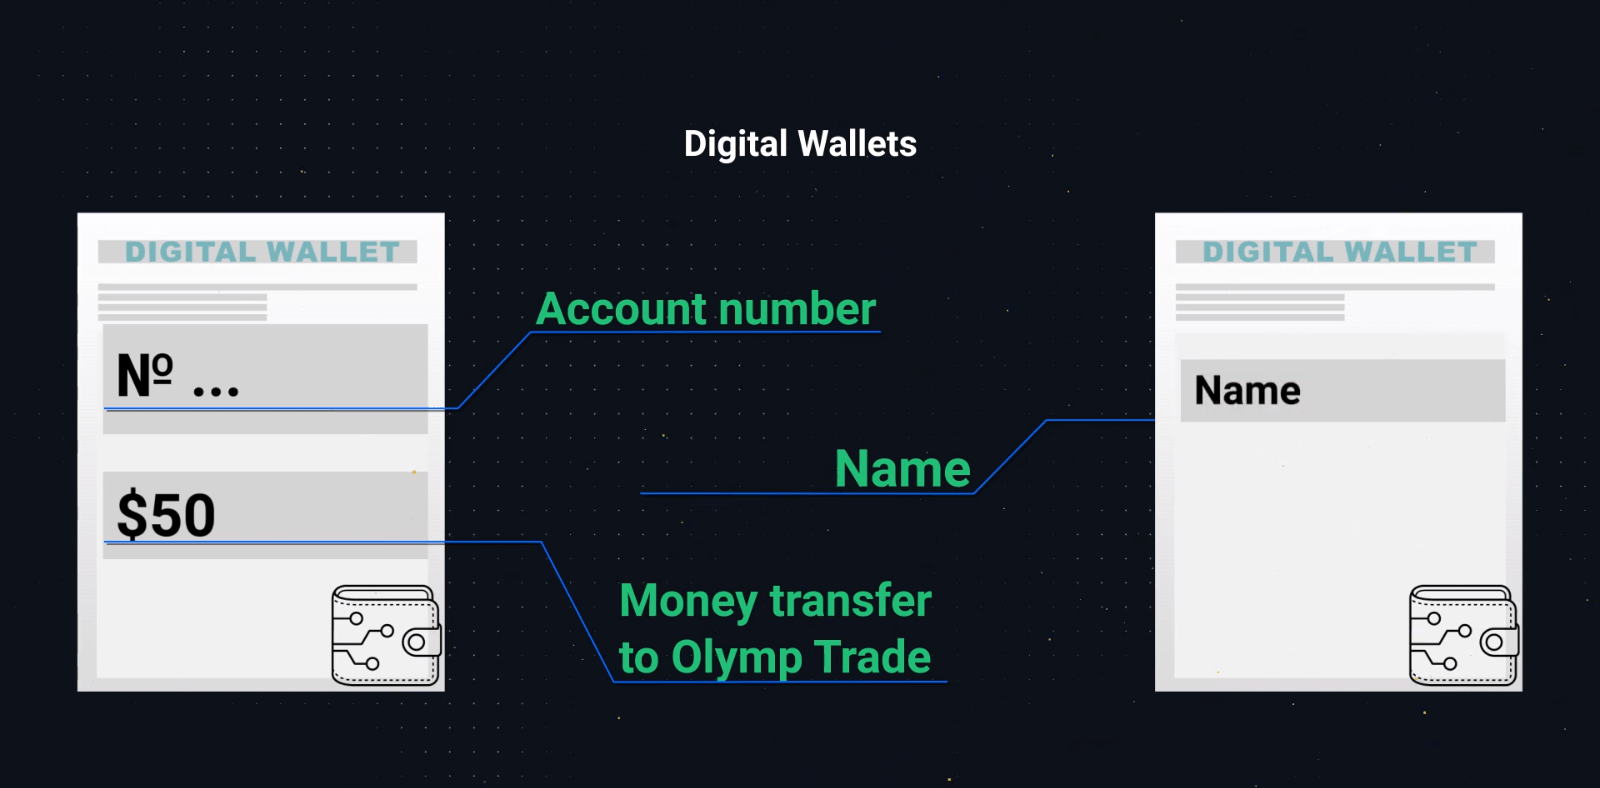 How to Login and Verify Account in Olymp Trade